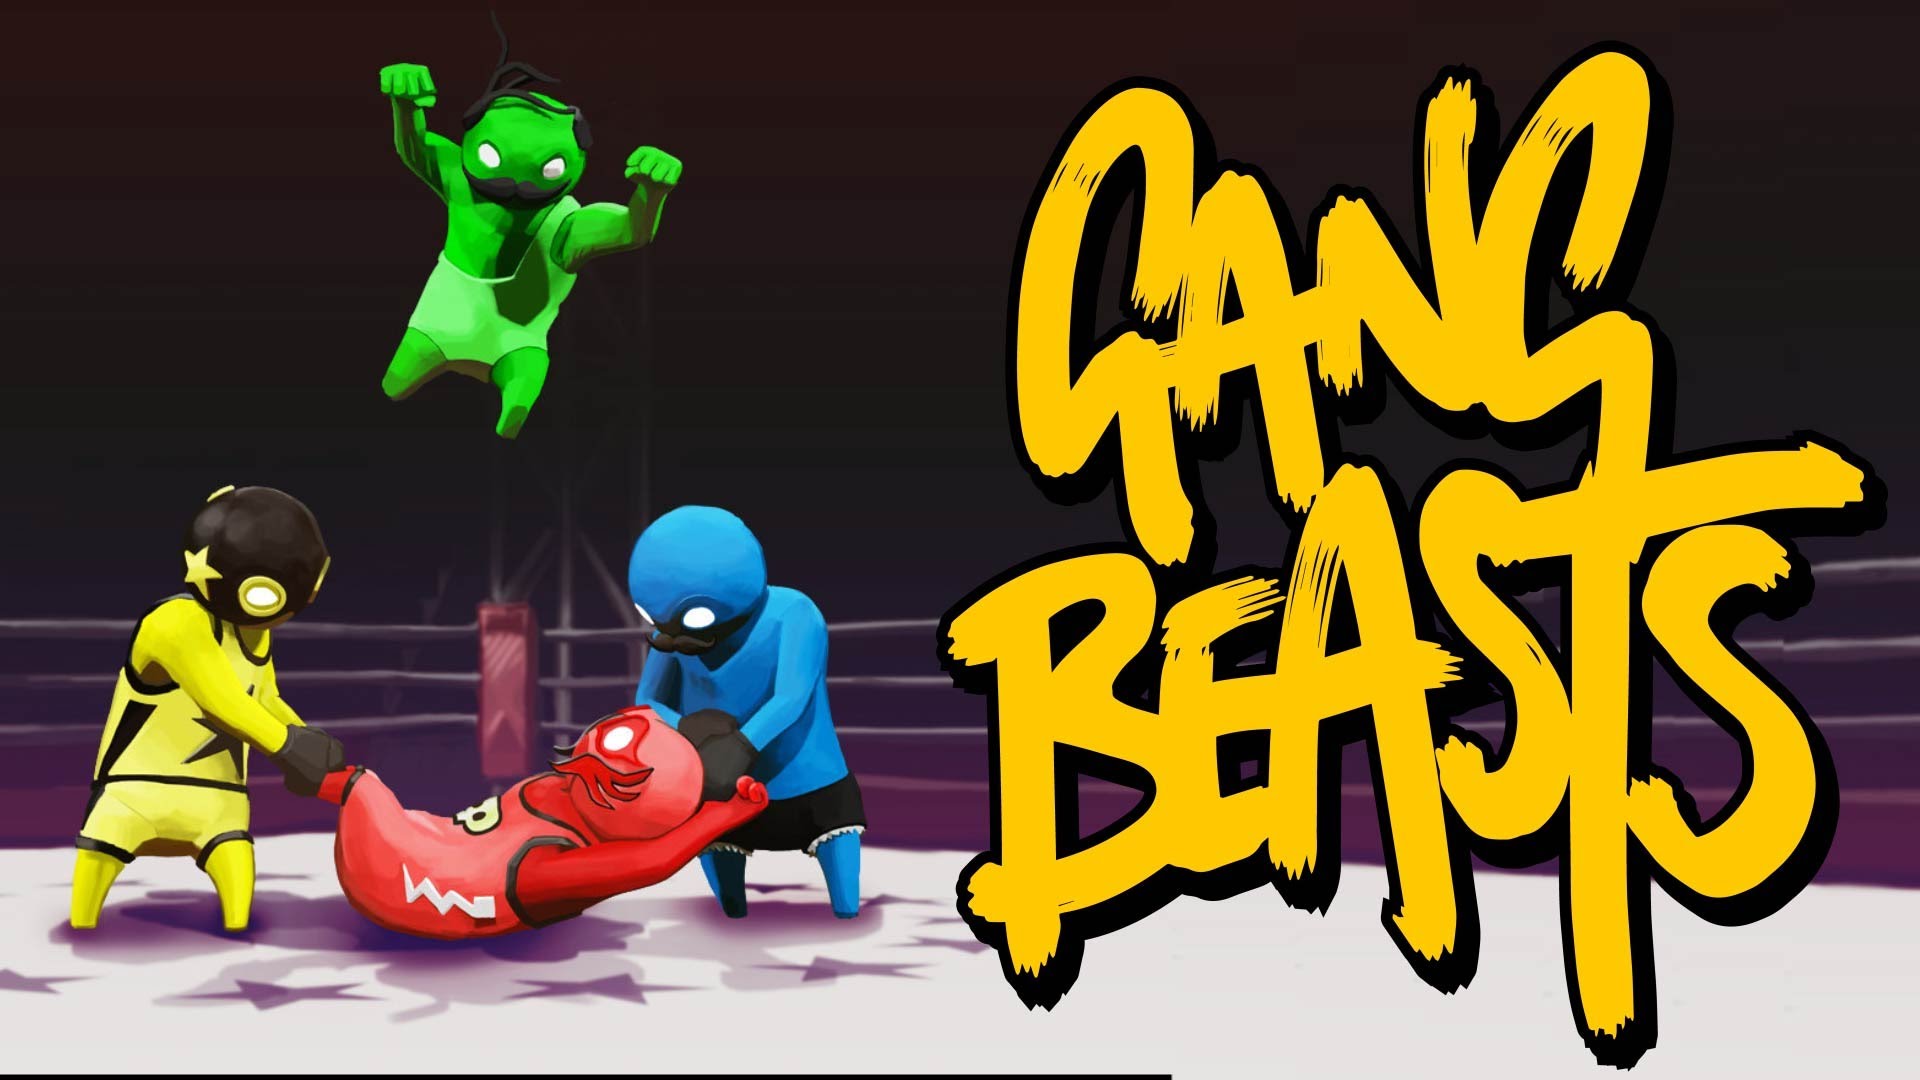 Image of the various Gang Beasts brawling with each other.